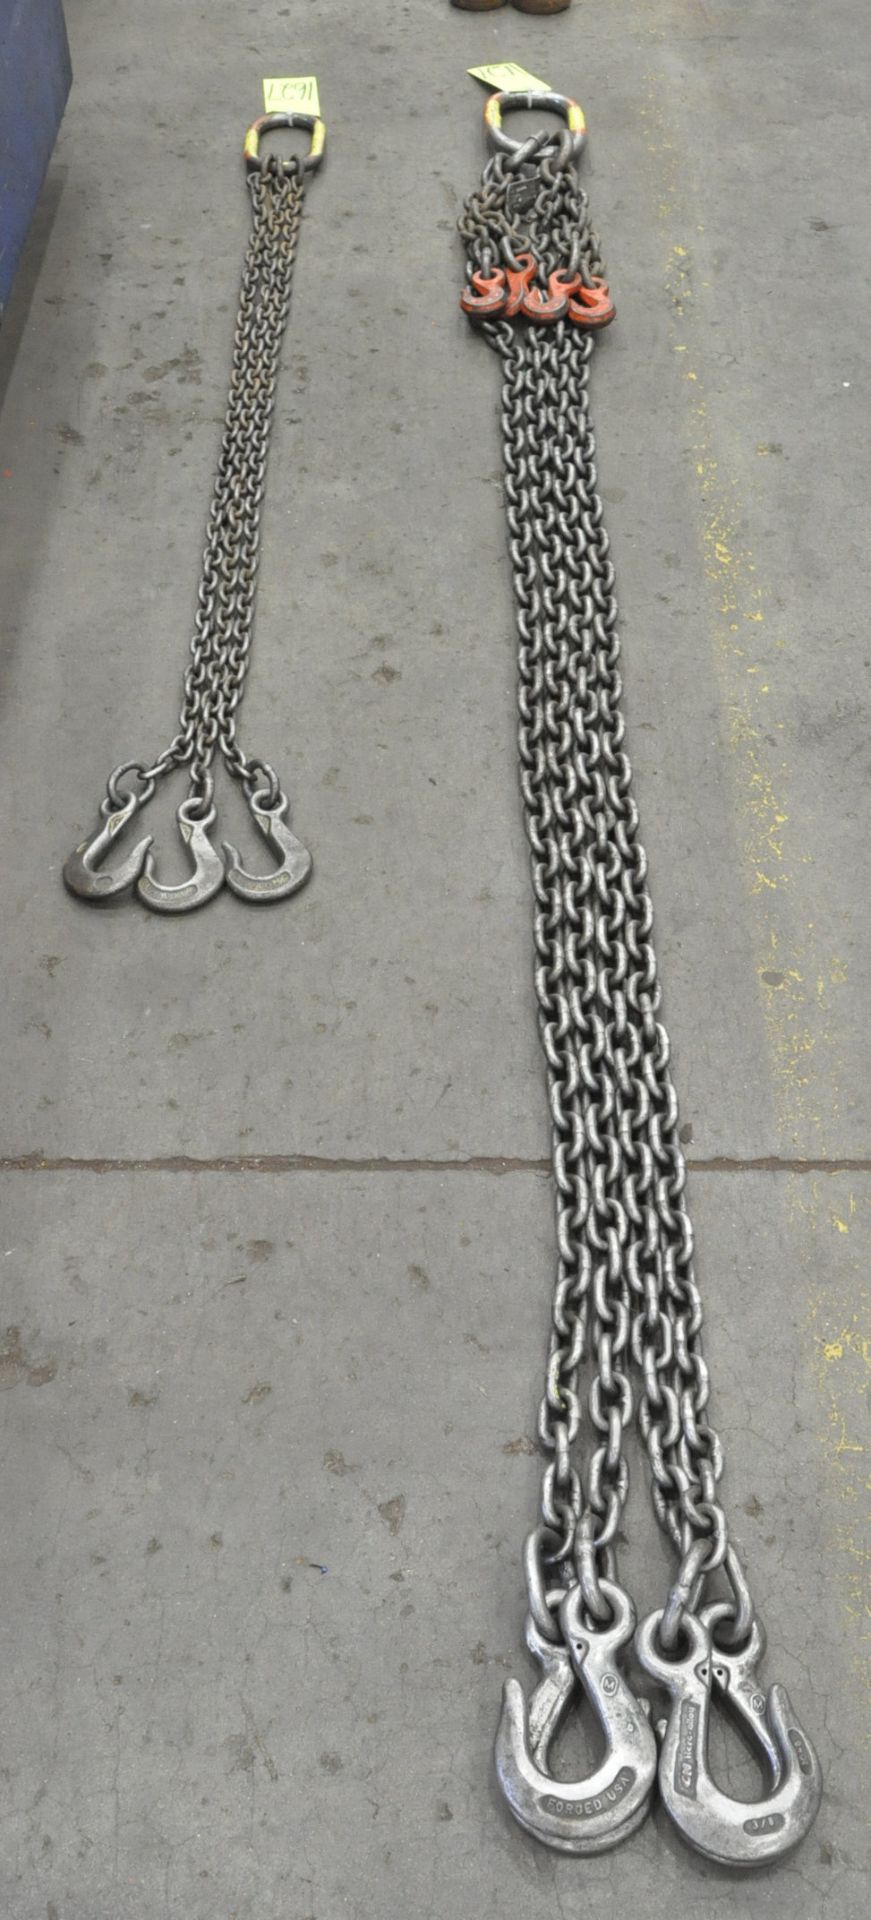 Lot-(1) 3/8" Link x 8' Long 4-Hook Chain Sling with (4) Chokers, and (1) 9/32" Link x 5' Long 3-Hook - Image 2 of 2